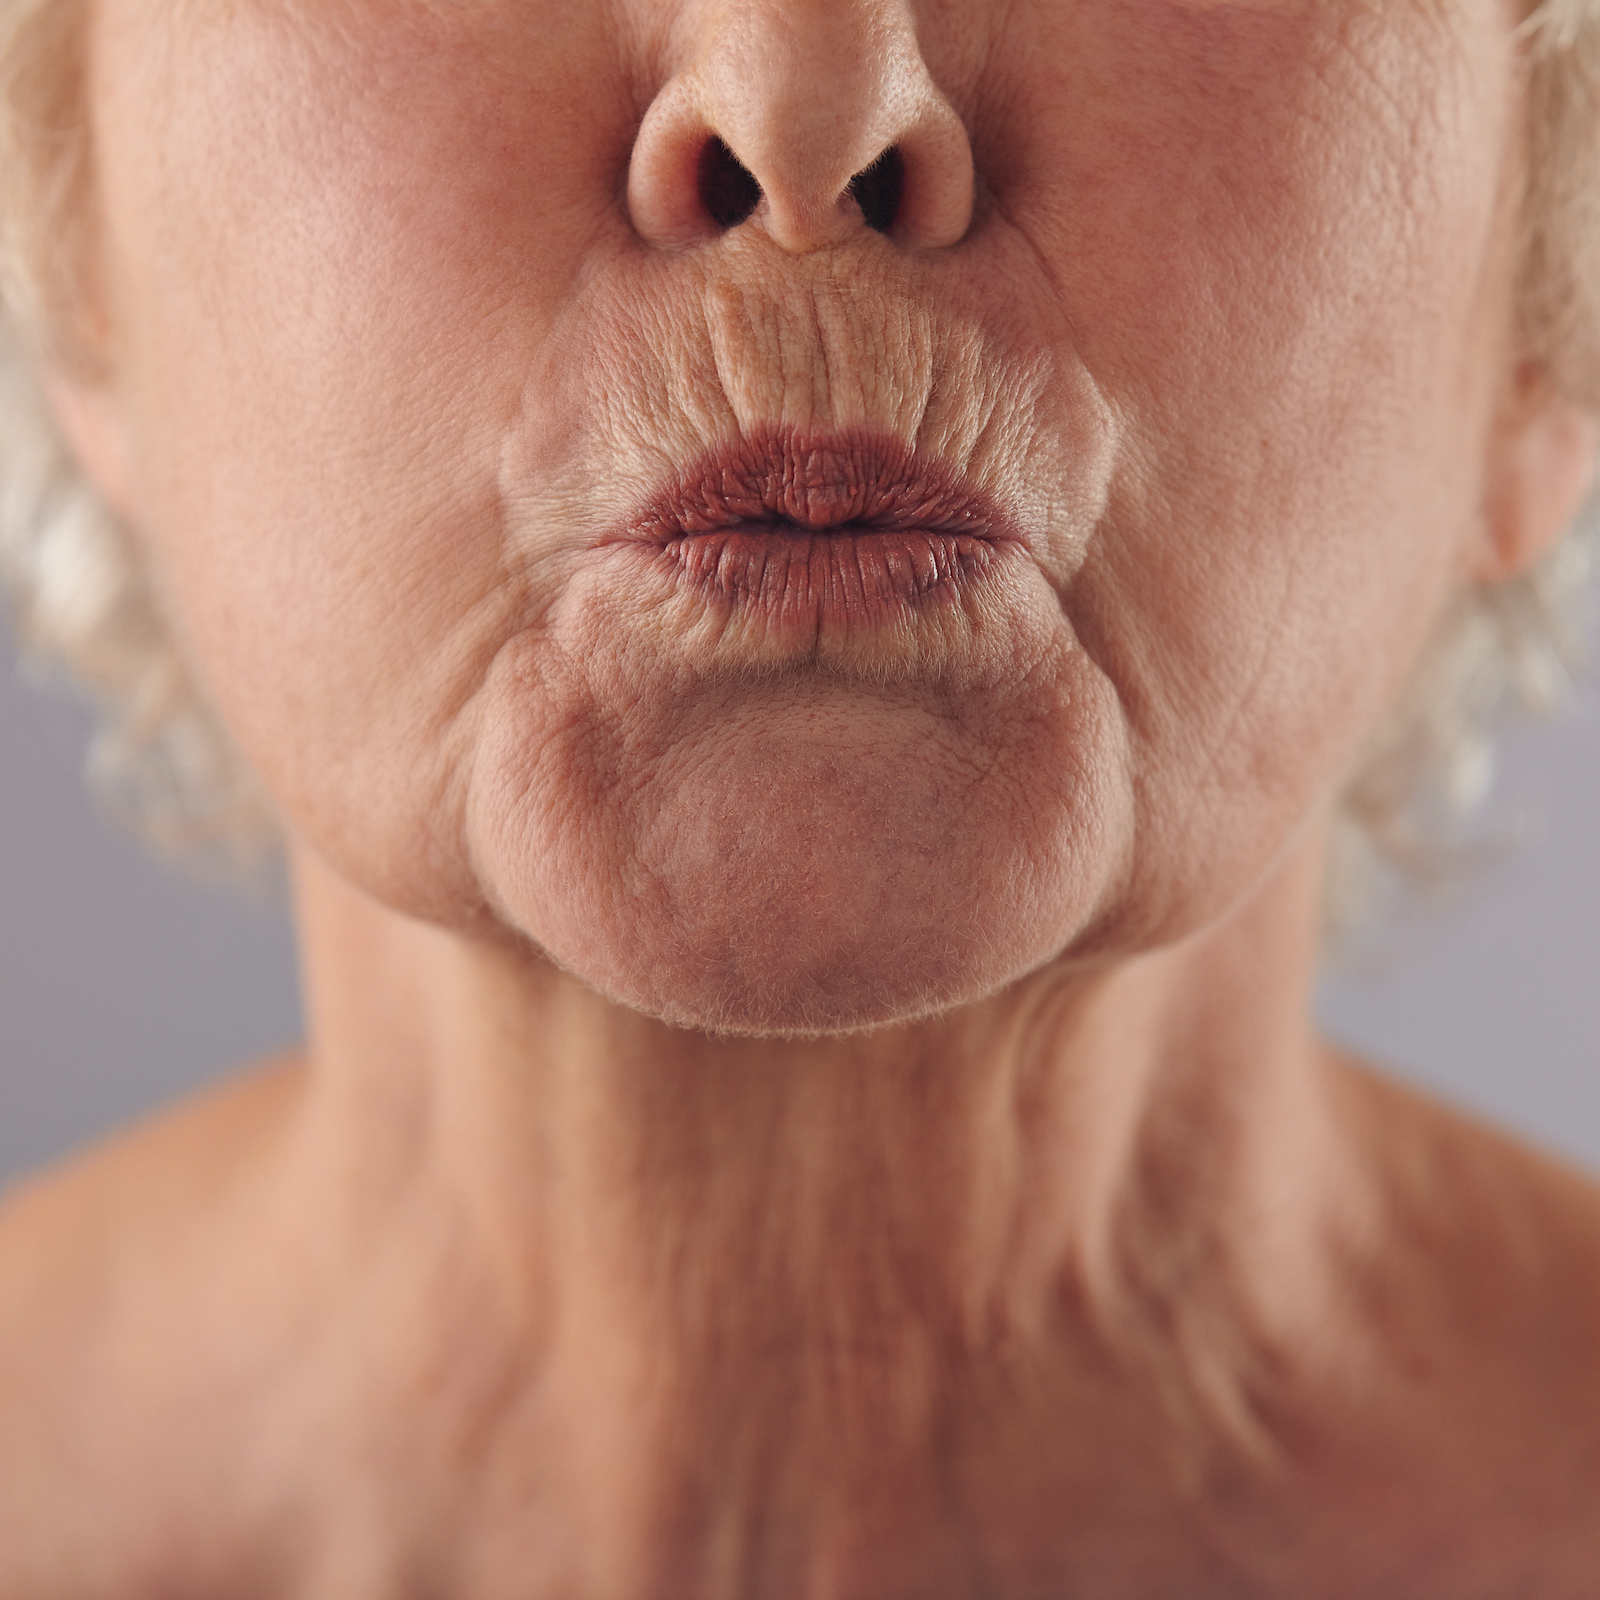 Efficacy of Pursed-Lips Breathing: A BREATHING PATTERN RETRAINING STRATEGY  FOR DYSPNEA REDUCTION | Article | NursingCenter